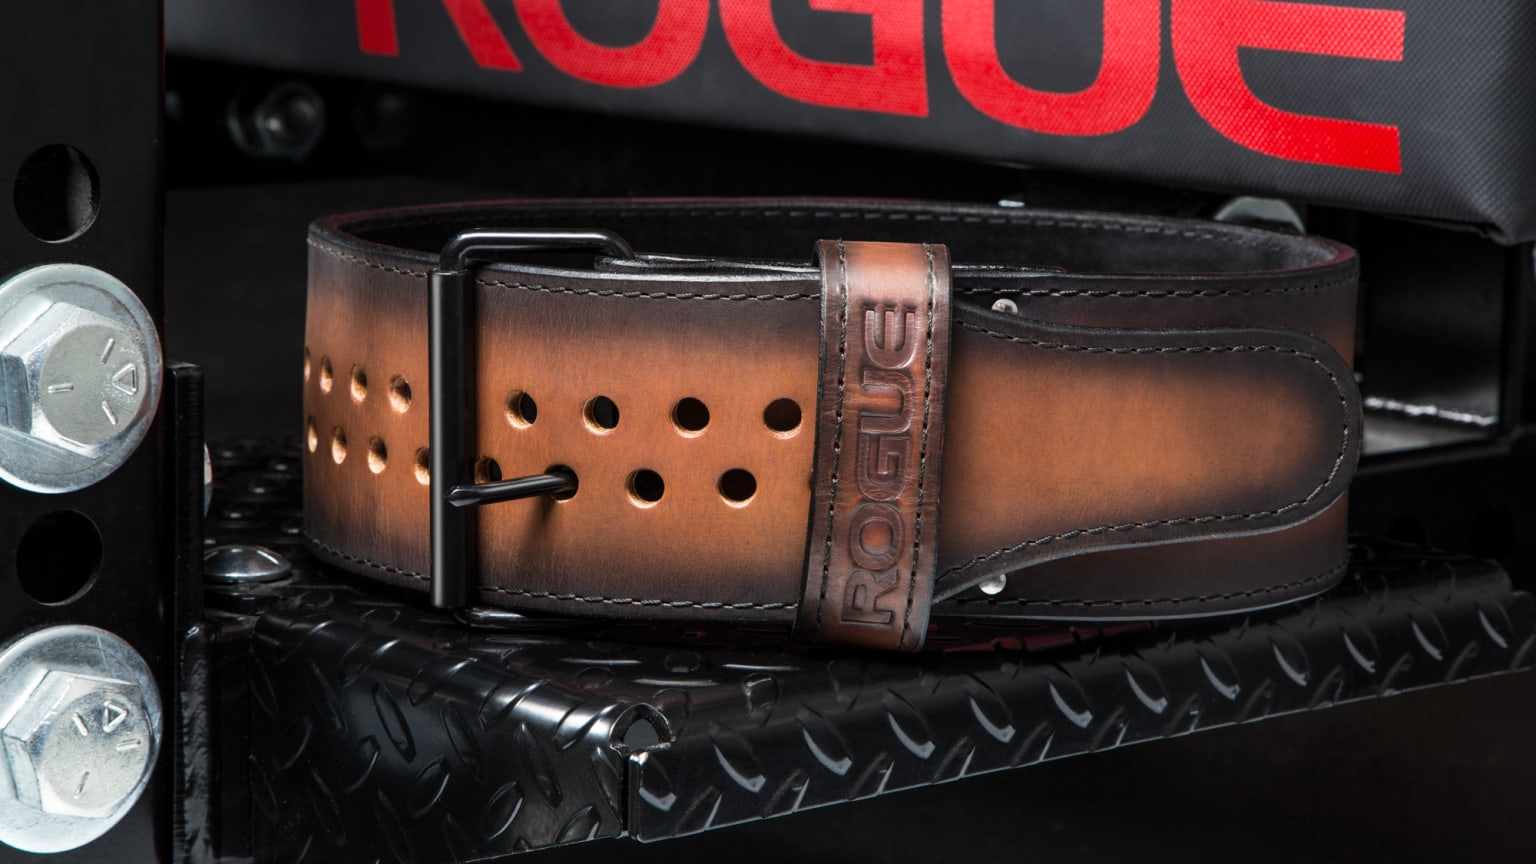 Rogue Oly Ohio Lifting Belt - Weightlifting - Vegetable Tanned Leather